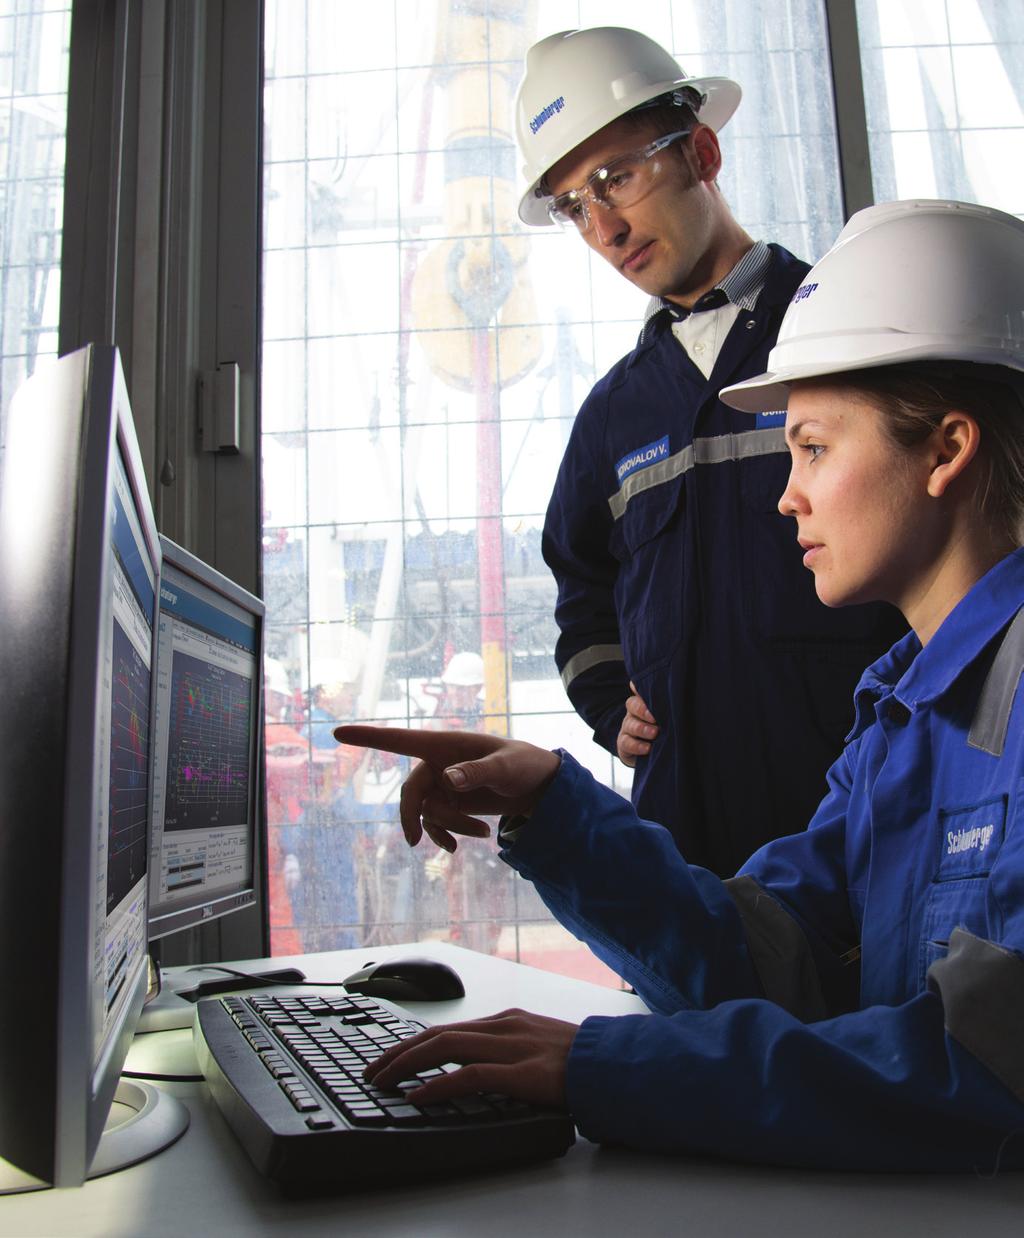 Our training services help you better adapt to ever-more complex oilfield challenges and be certain. www.slb.